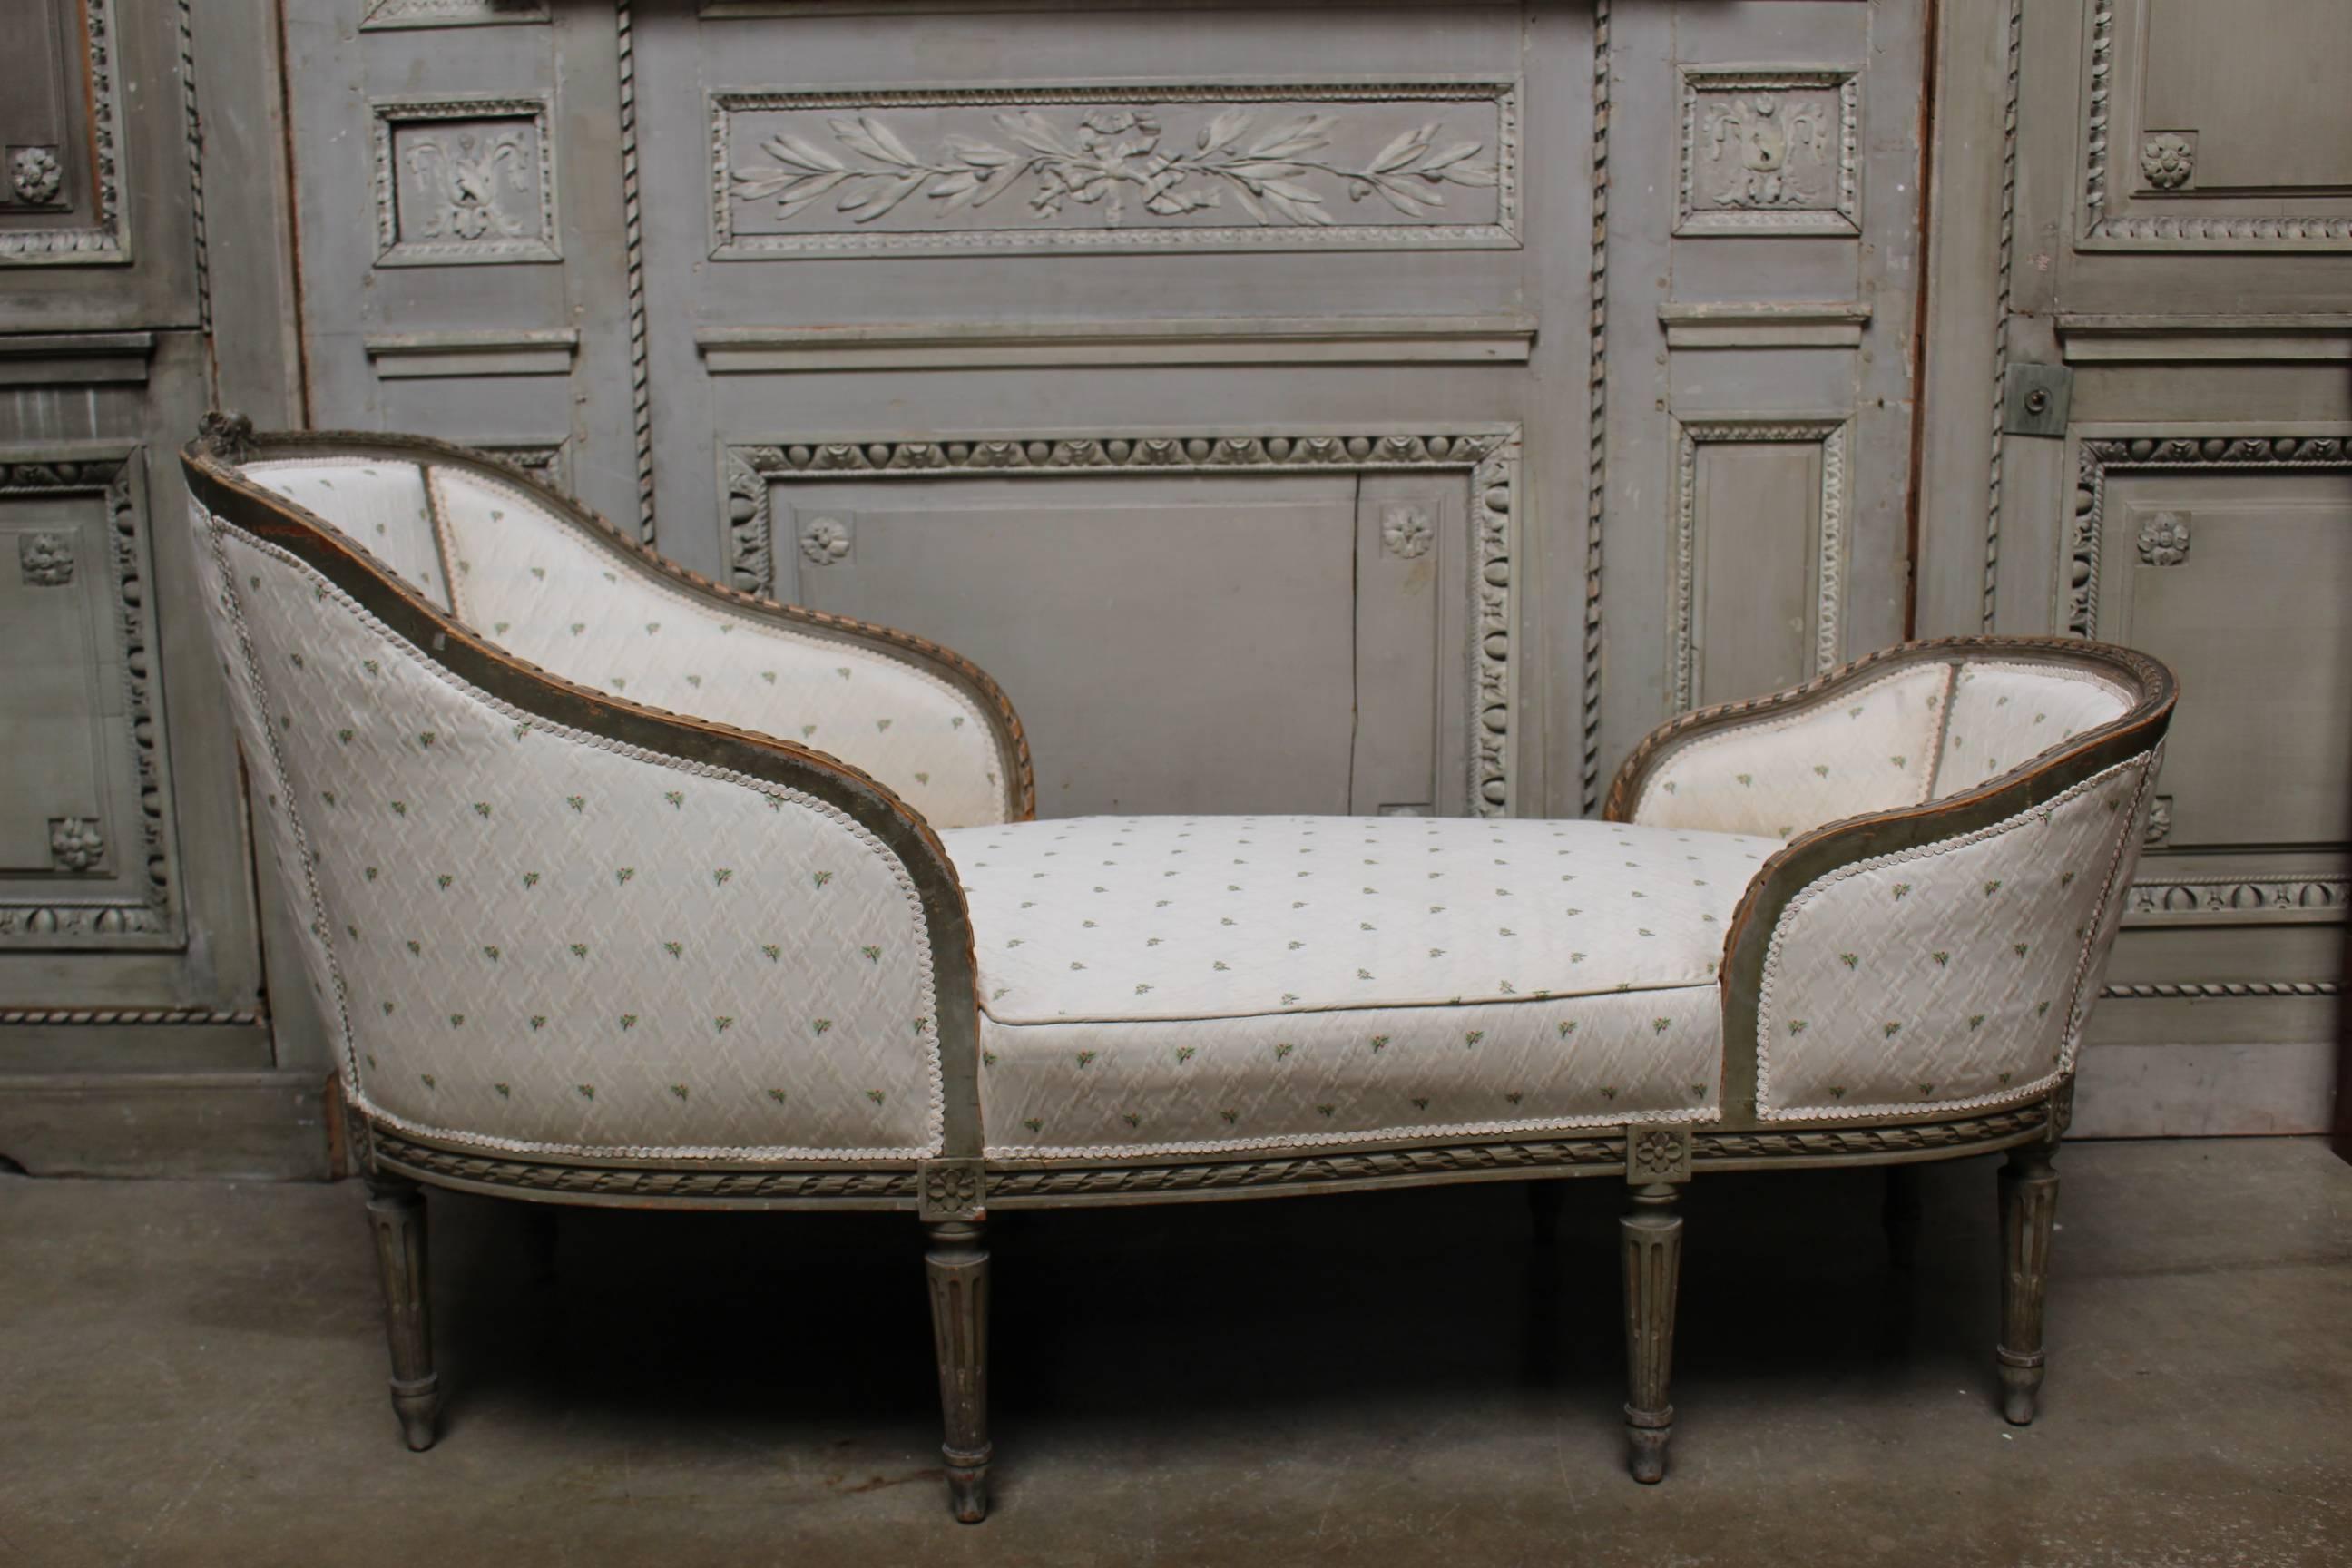 French Louis XVI style chaise lounge from the late 19th century with a French gray painted finish.
This chaise lounge is a wonderful small scale and is comfortable to use. It is beautifully carved with gadrooning, fluted legs and flowers in a